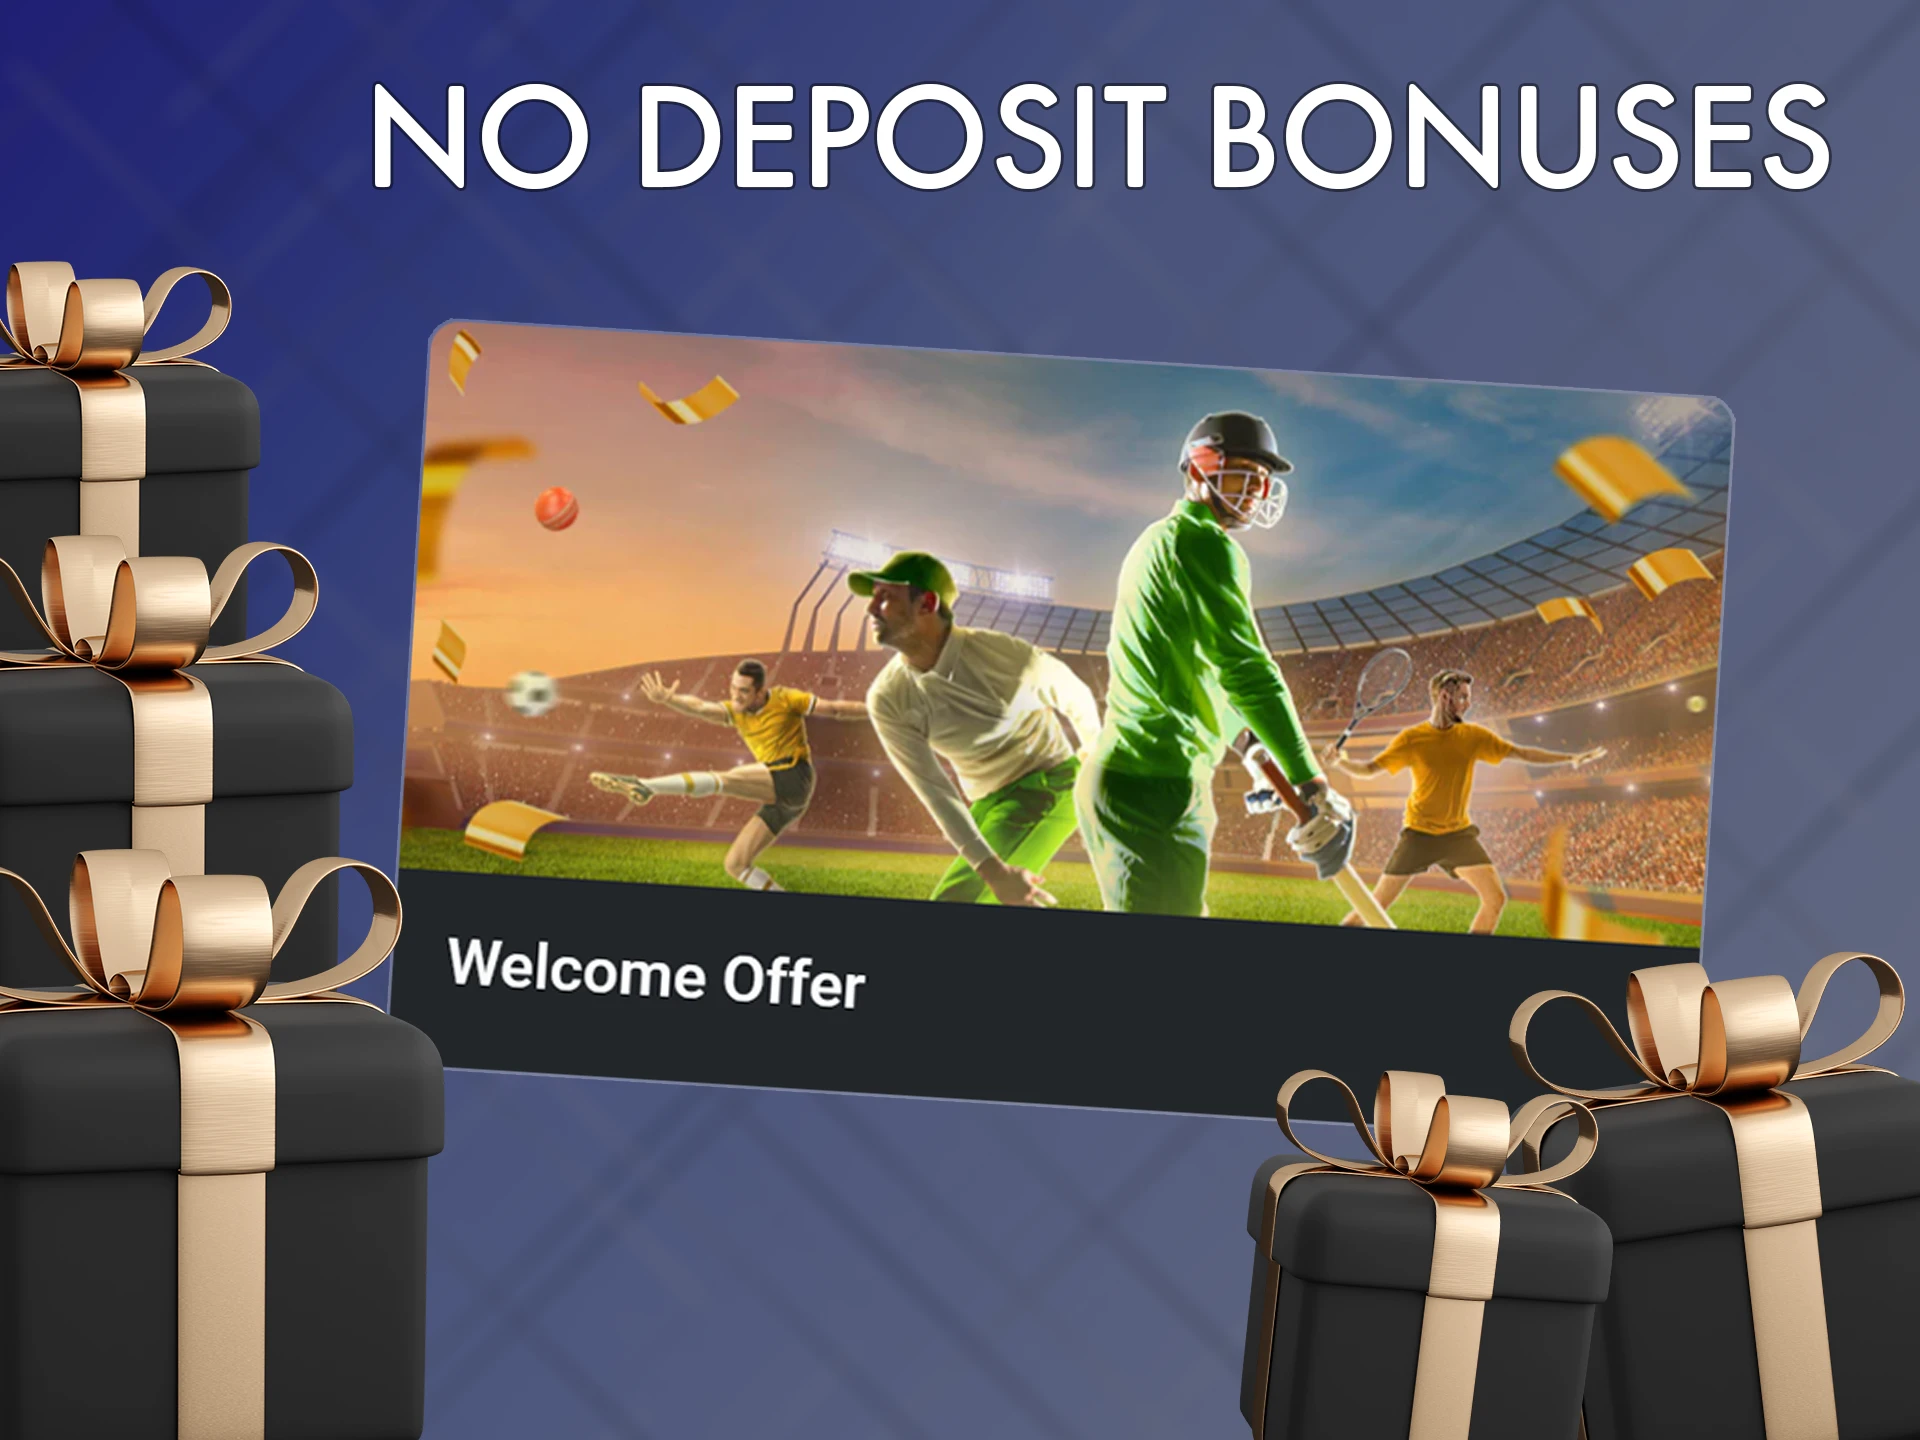 Take advantage of a no deposit bonus from bookmakers.